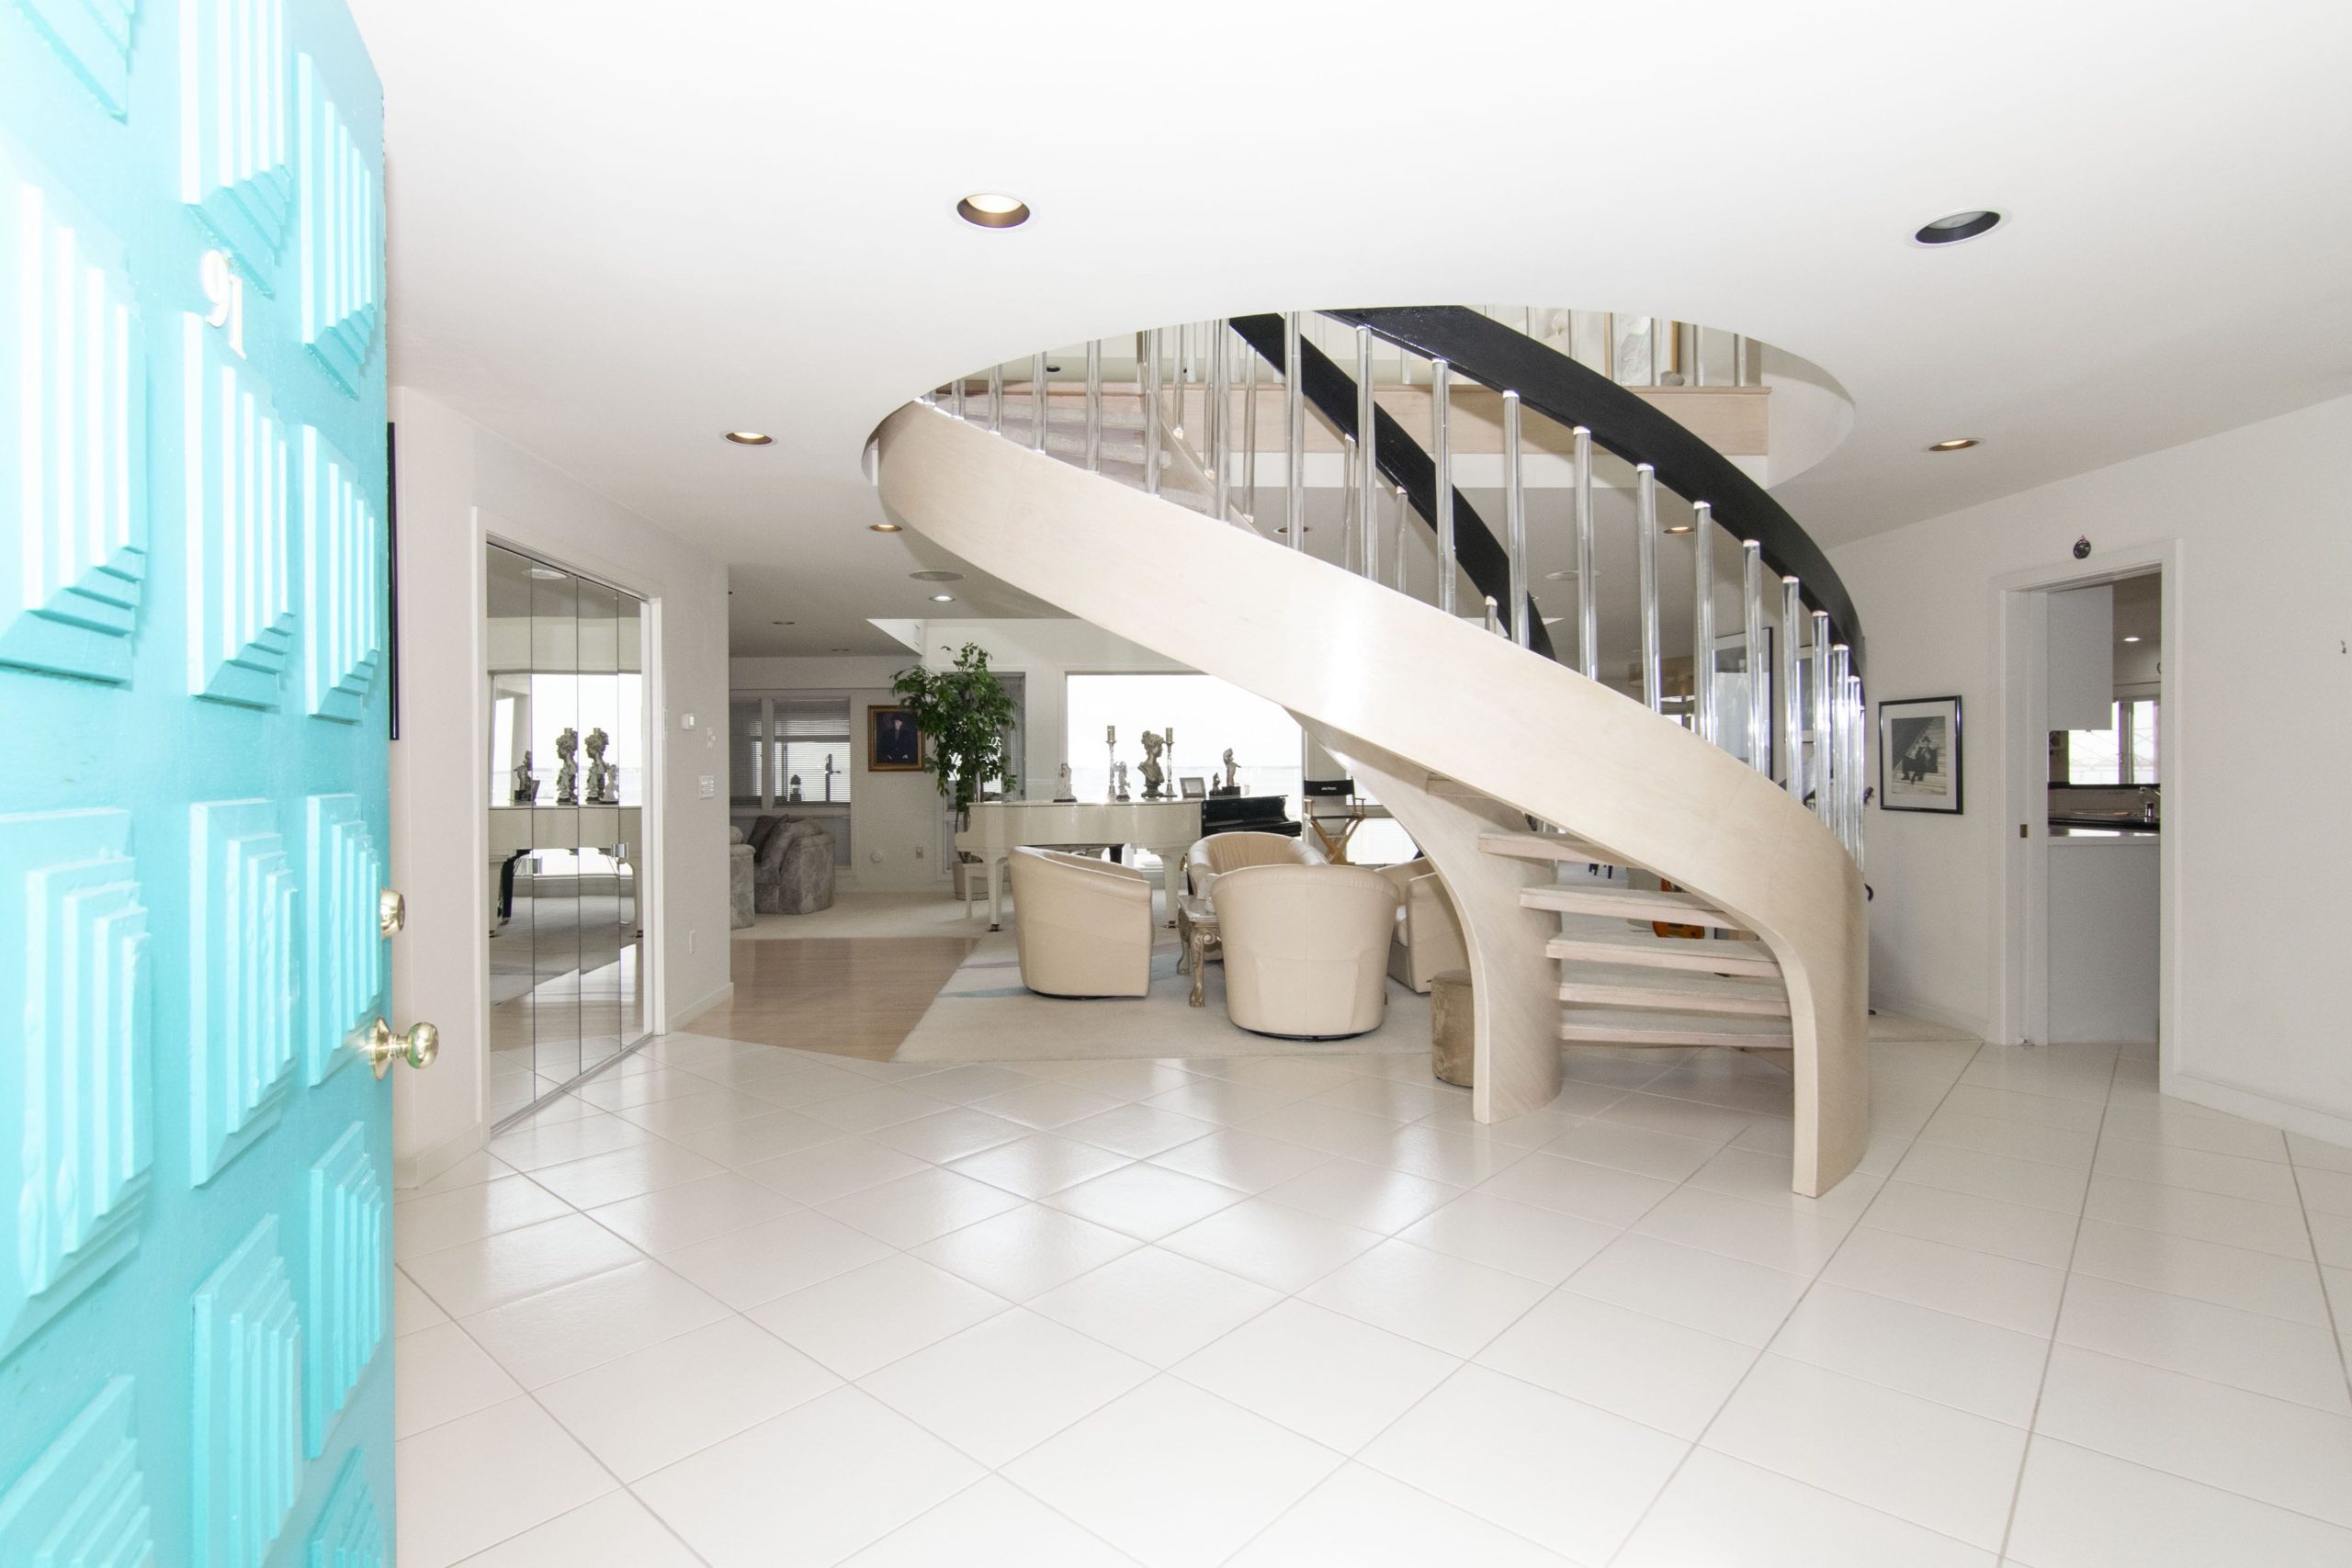 The curved staircase in the foyer of Joe Pesci's New Jersey shore mansion